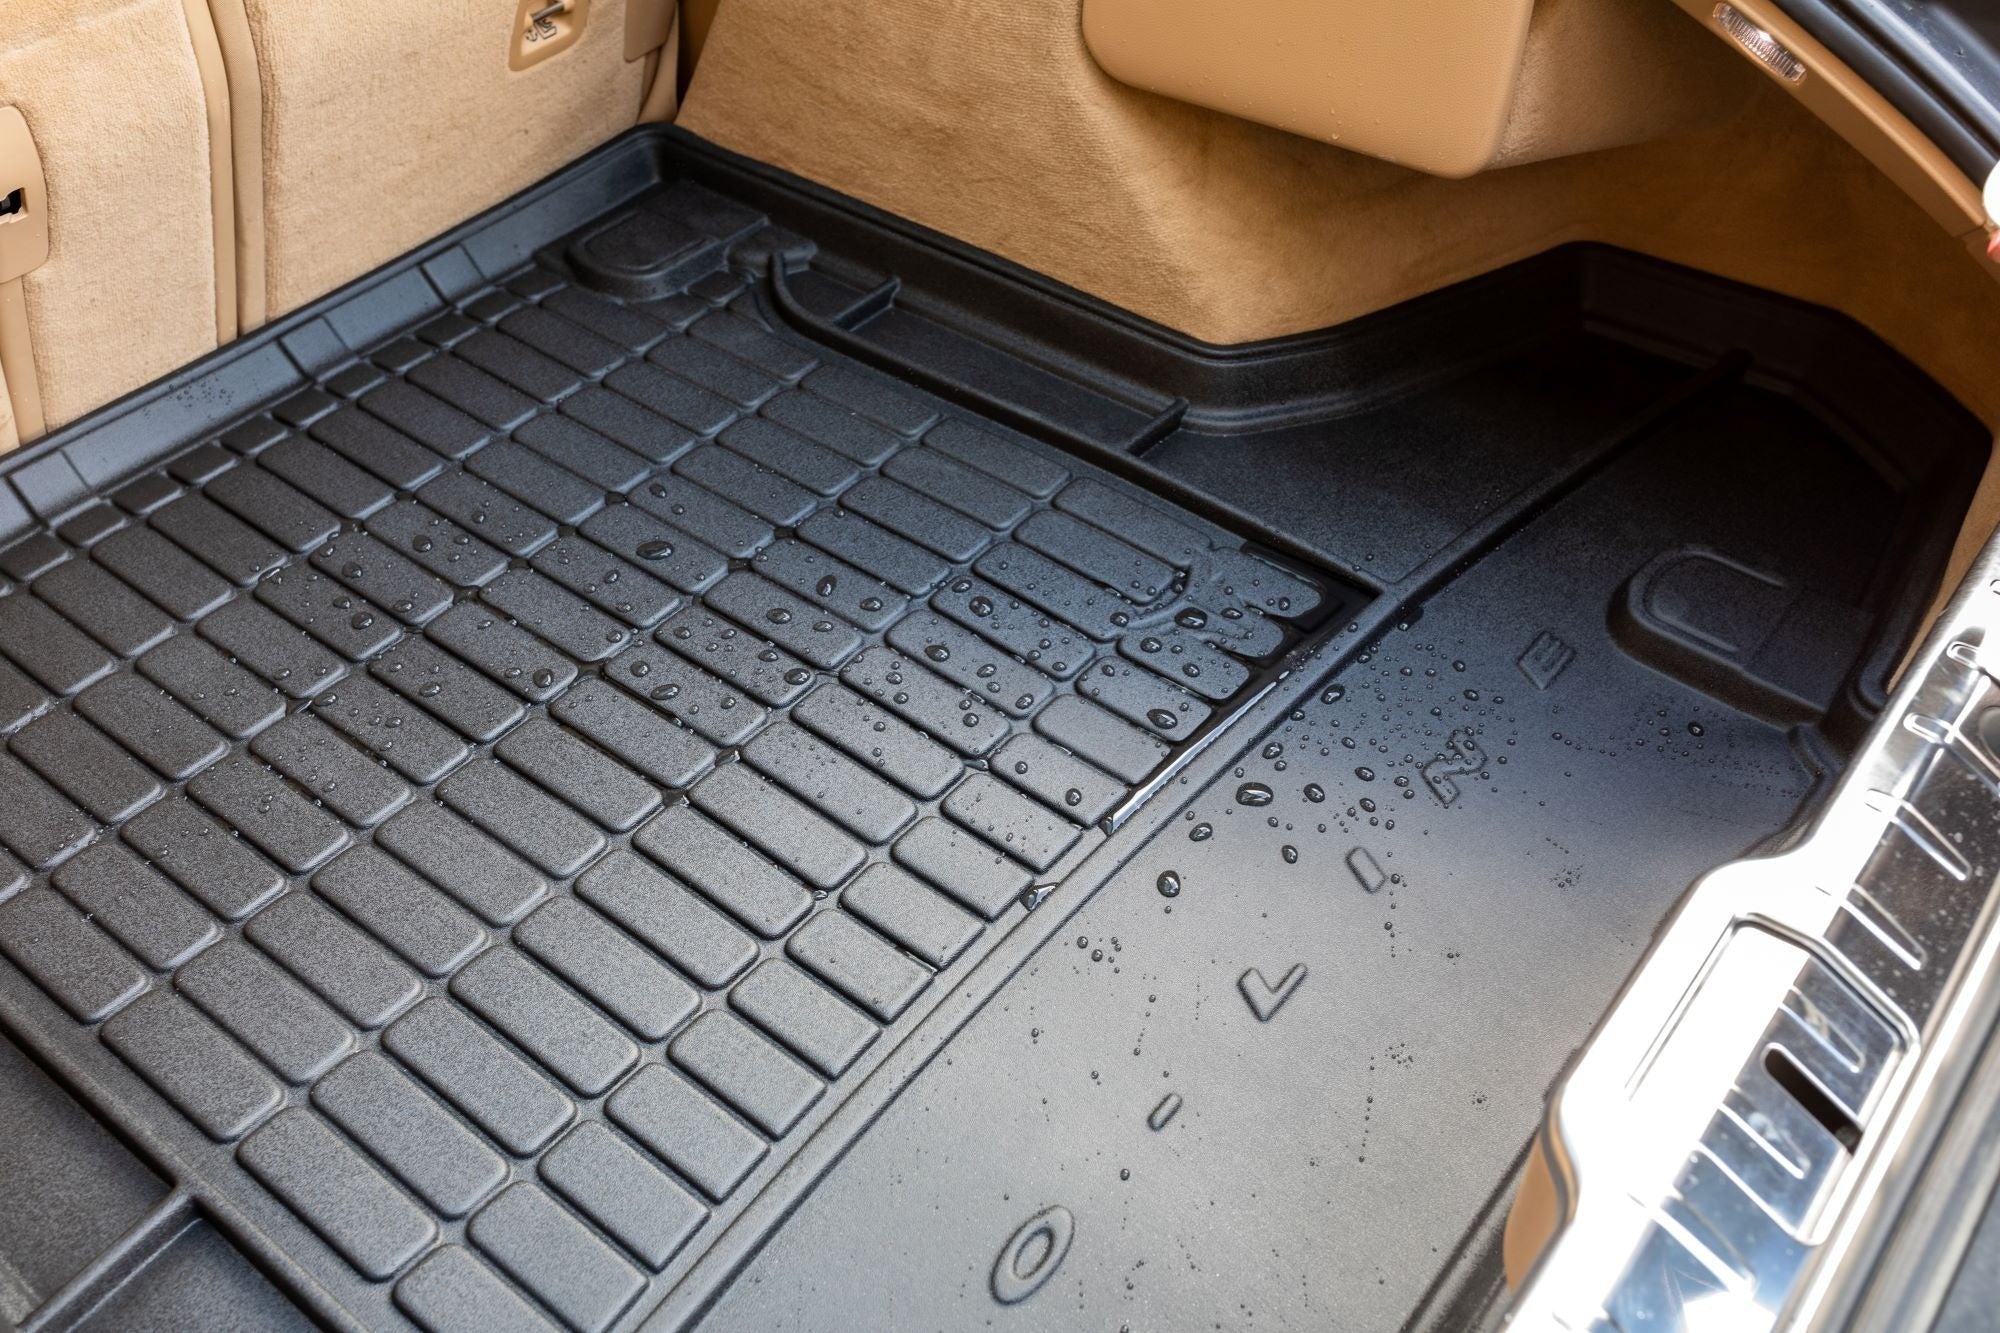 Tailored Car Boot Liner for VW - Protect Your Boot from Dirt and Damage - Green Flag vGroup